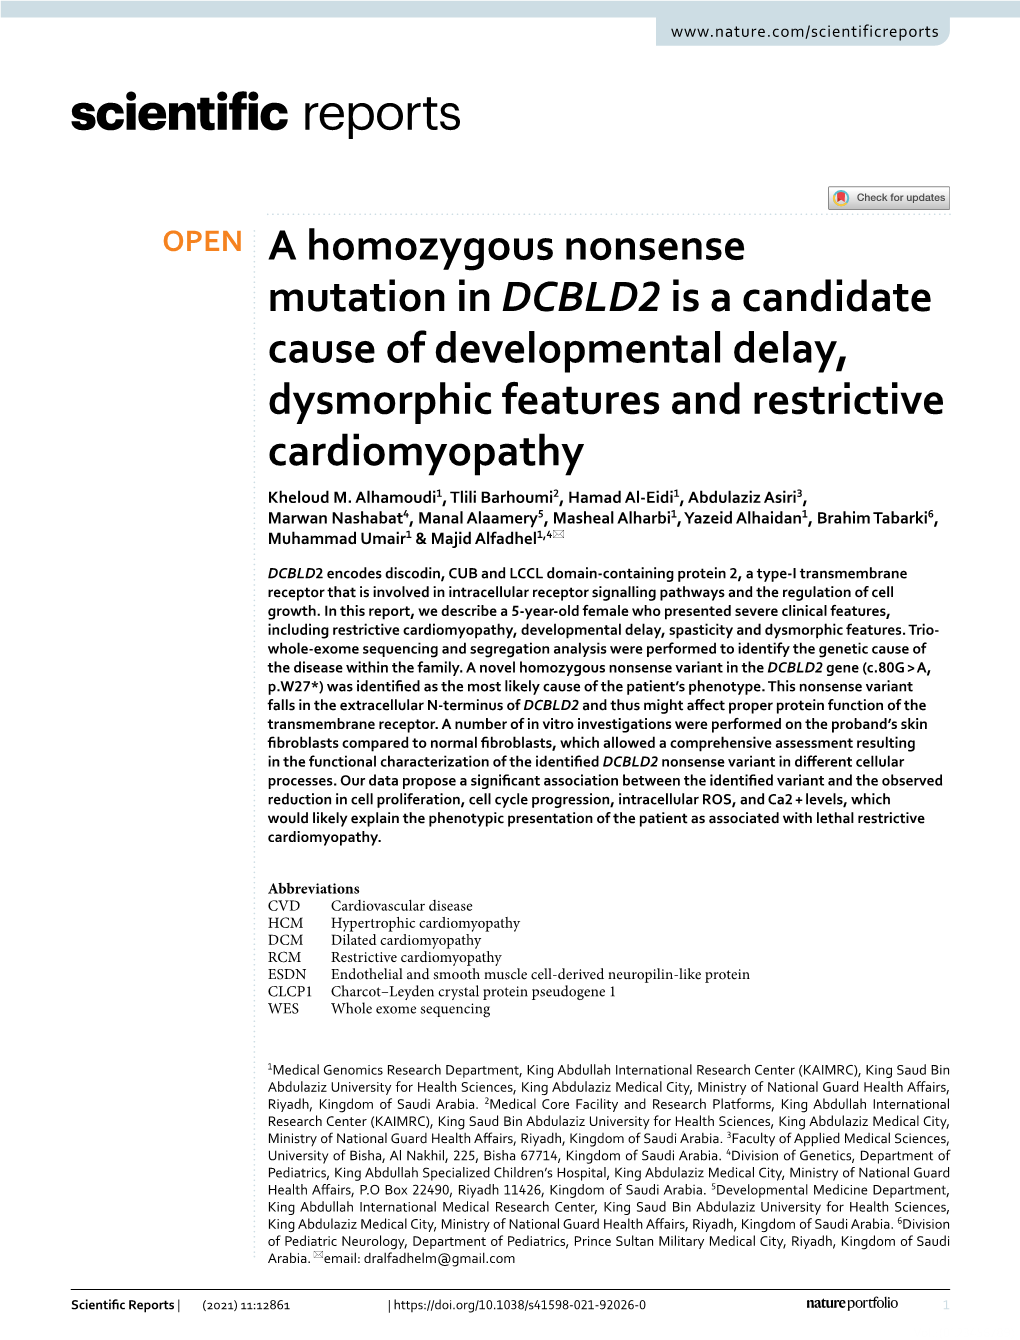 A Homozygous Nonsense Mutation in DCBLD2 Is a Candidate Cause of Developmental Delay, Dysmorphic Features and Restrictive Cardiomyopathy Kheloud M